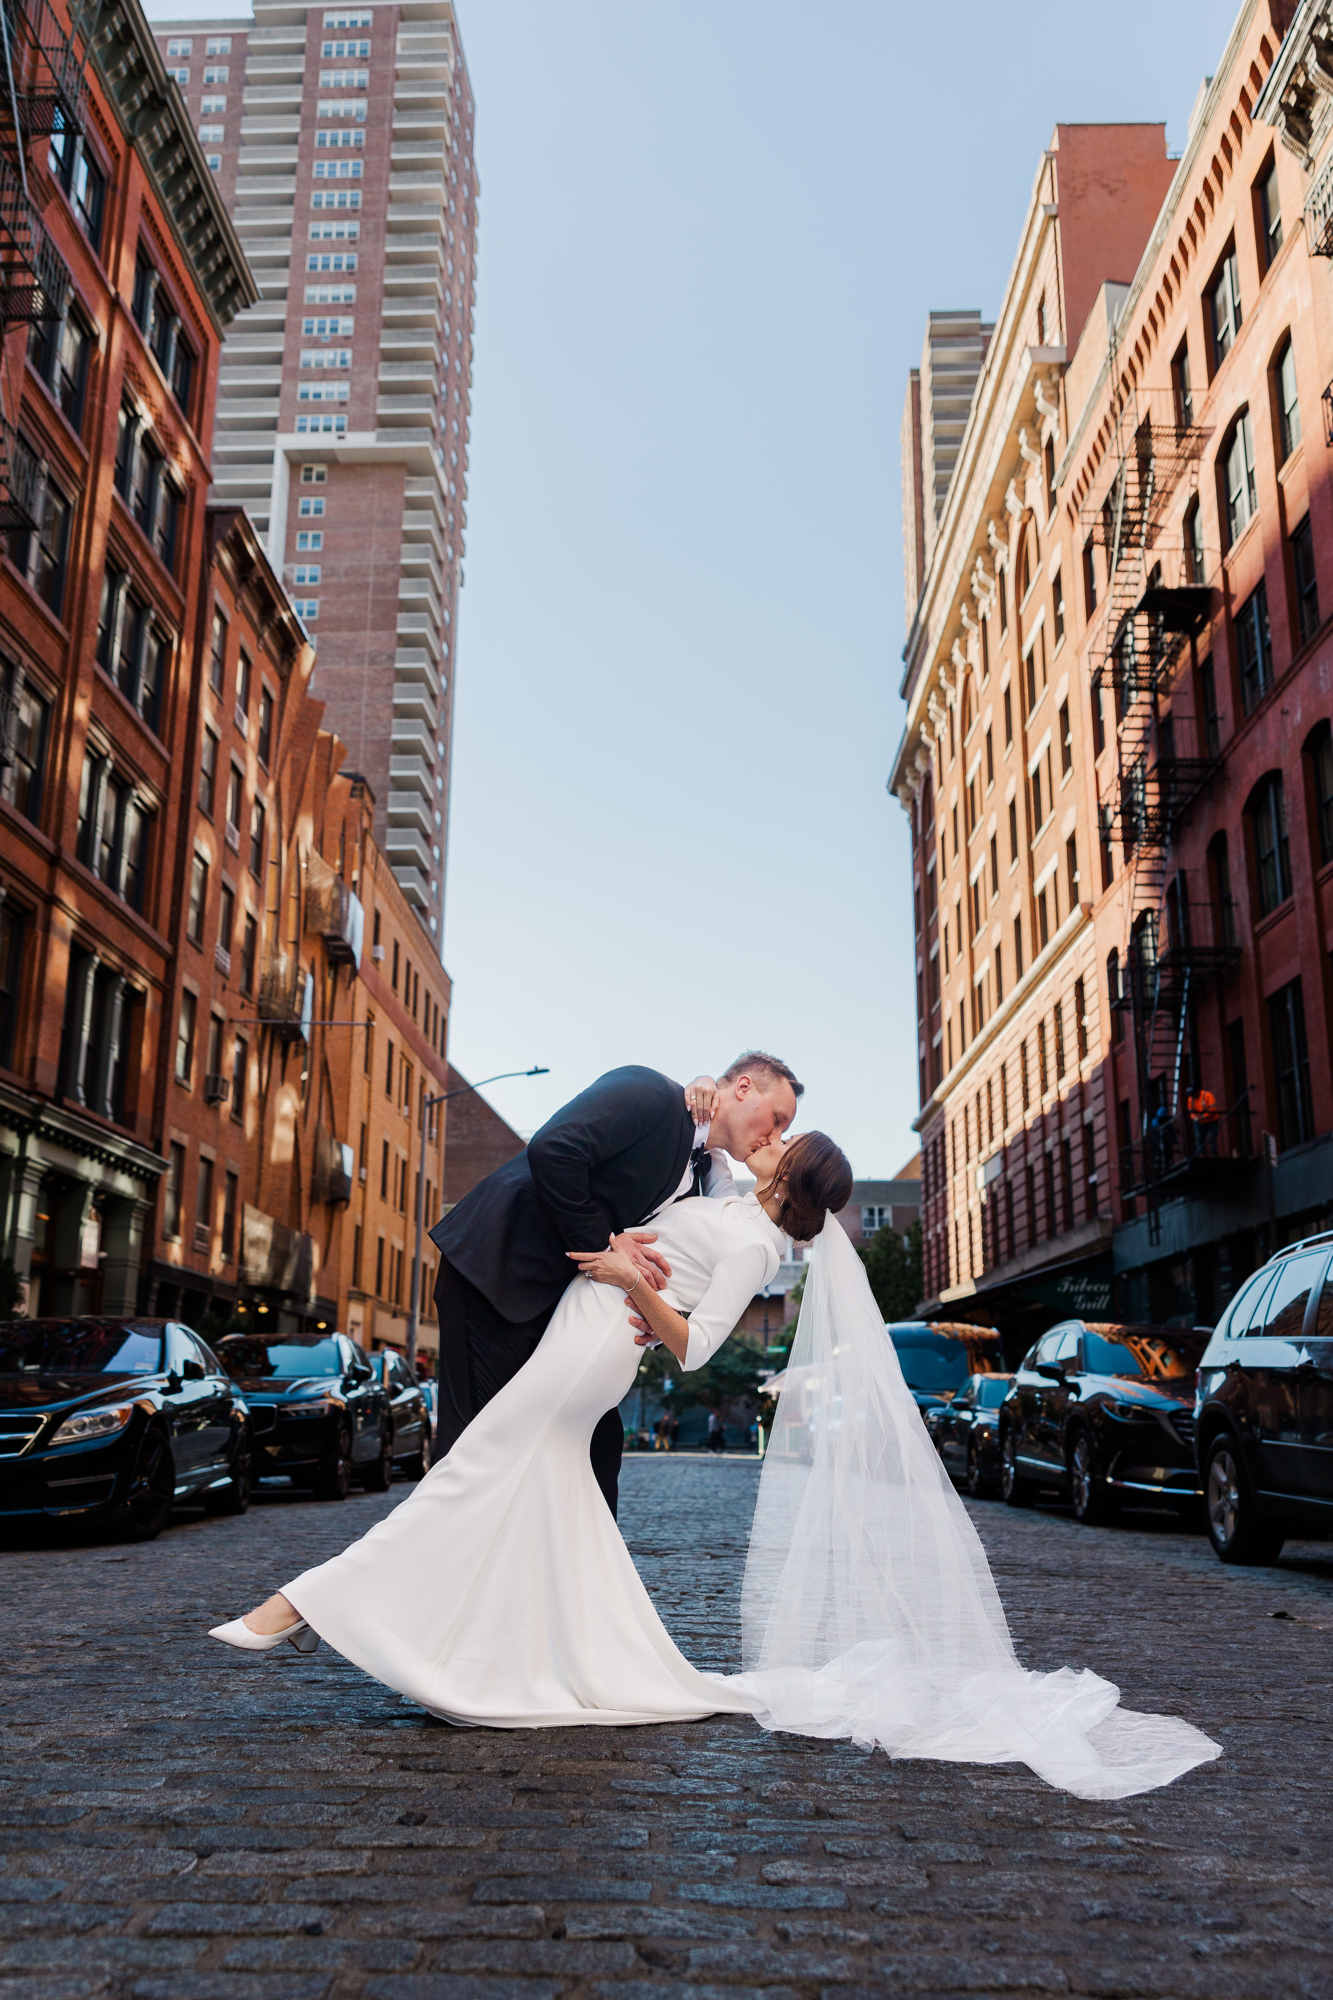 Beautiful and romantic Wedding at St. Francis Xavier in NYC